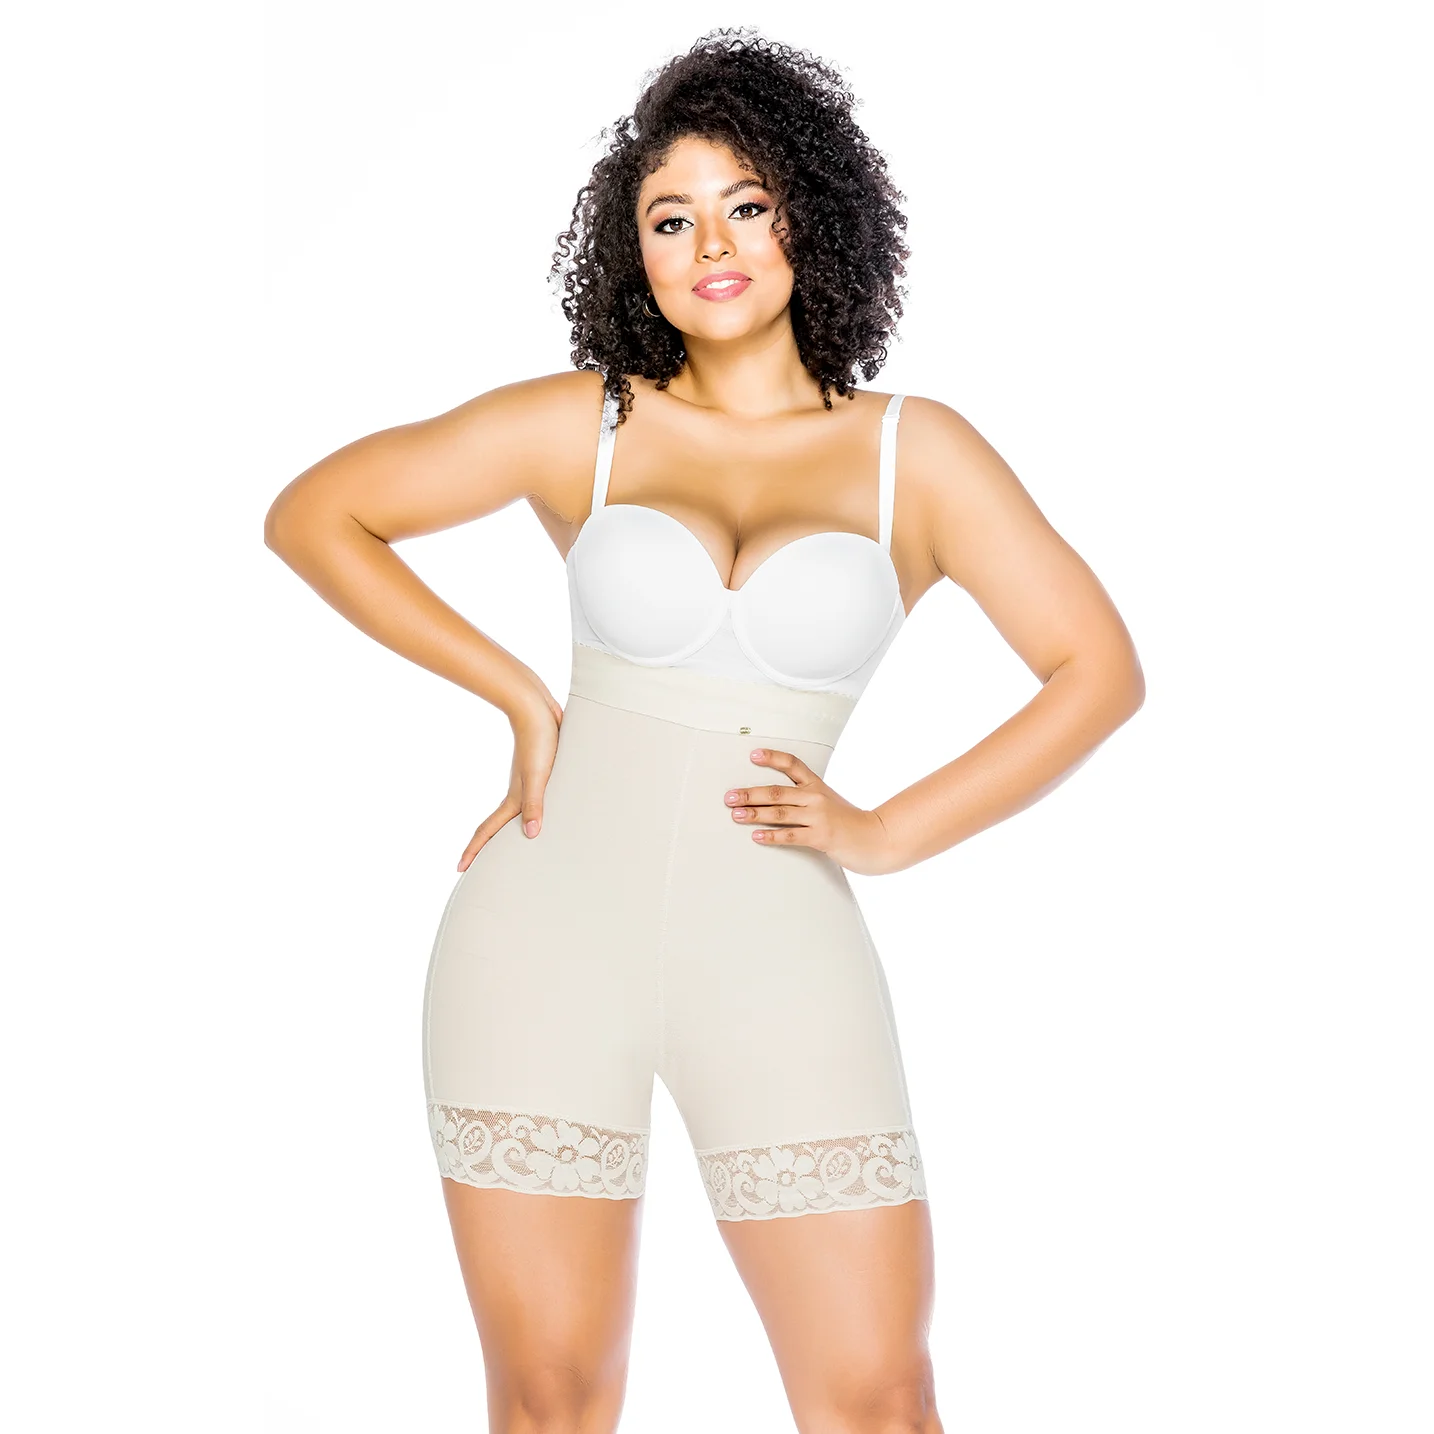 Fajas Colombian Girdle Waist Trainer Double Compression BBL Shorts